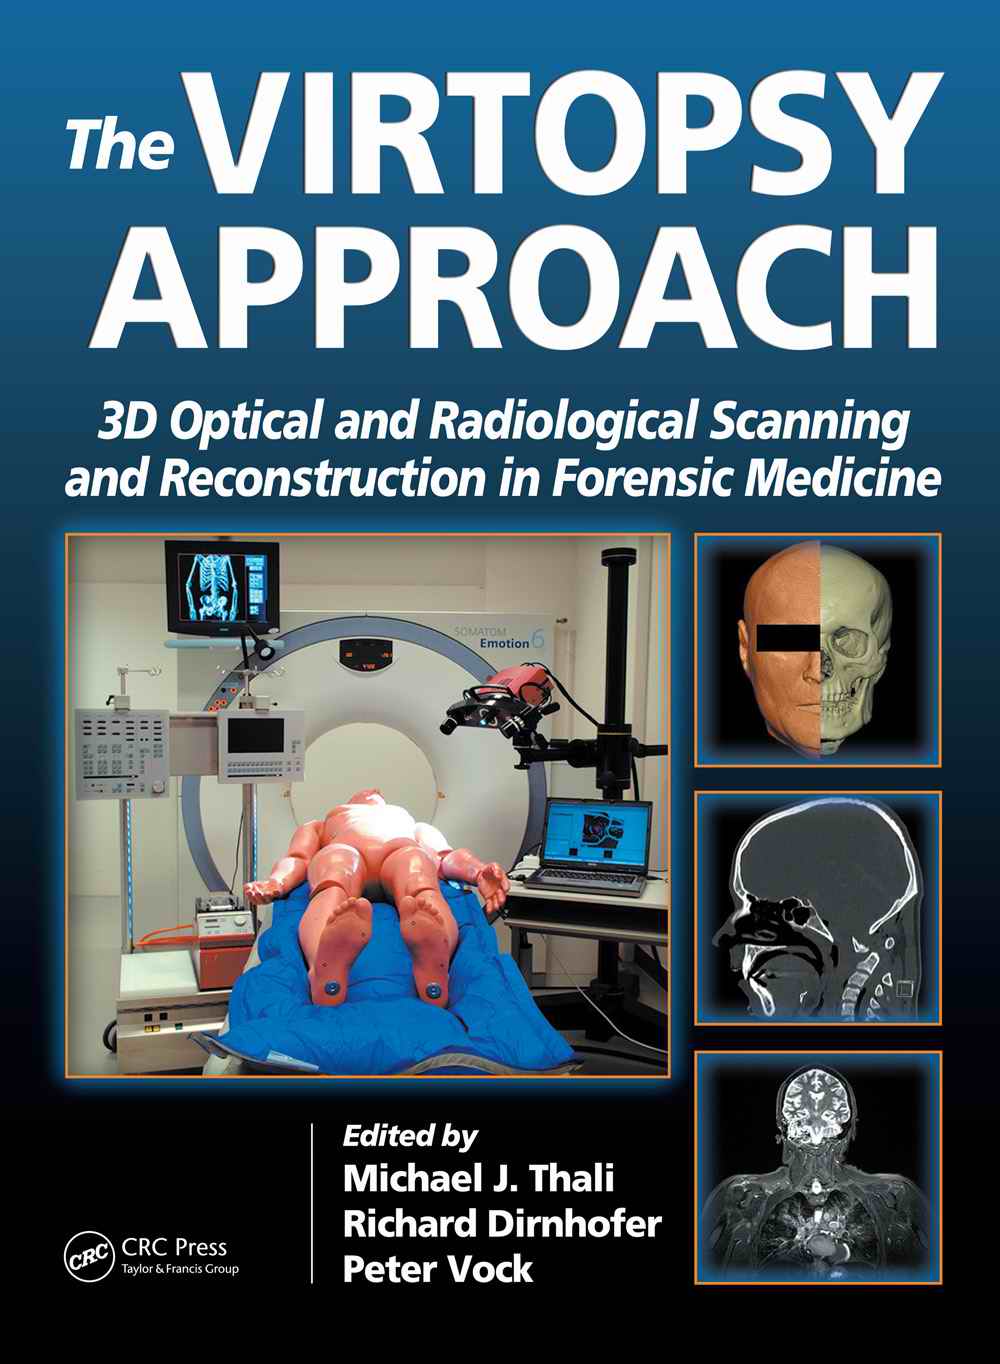 The Virtopsy Approach: 3D Optical and Radiological Scanning and Reconstruction in Forensic Medicine edited by Michael J. Thali, Richard Dirnhofer, Peter Vock